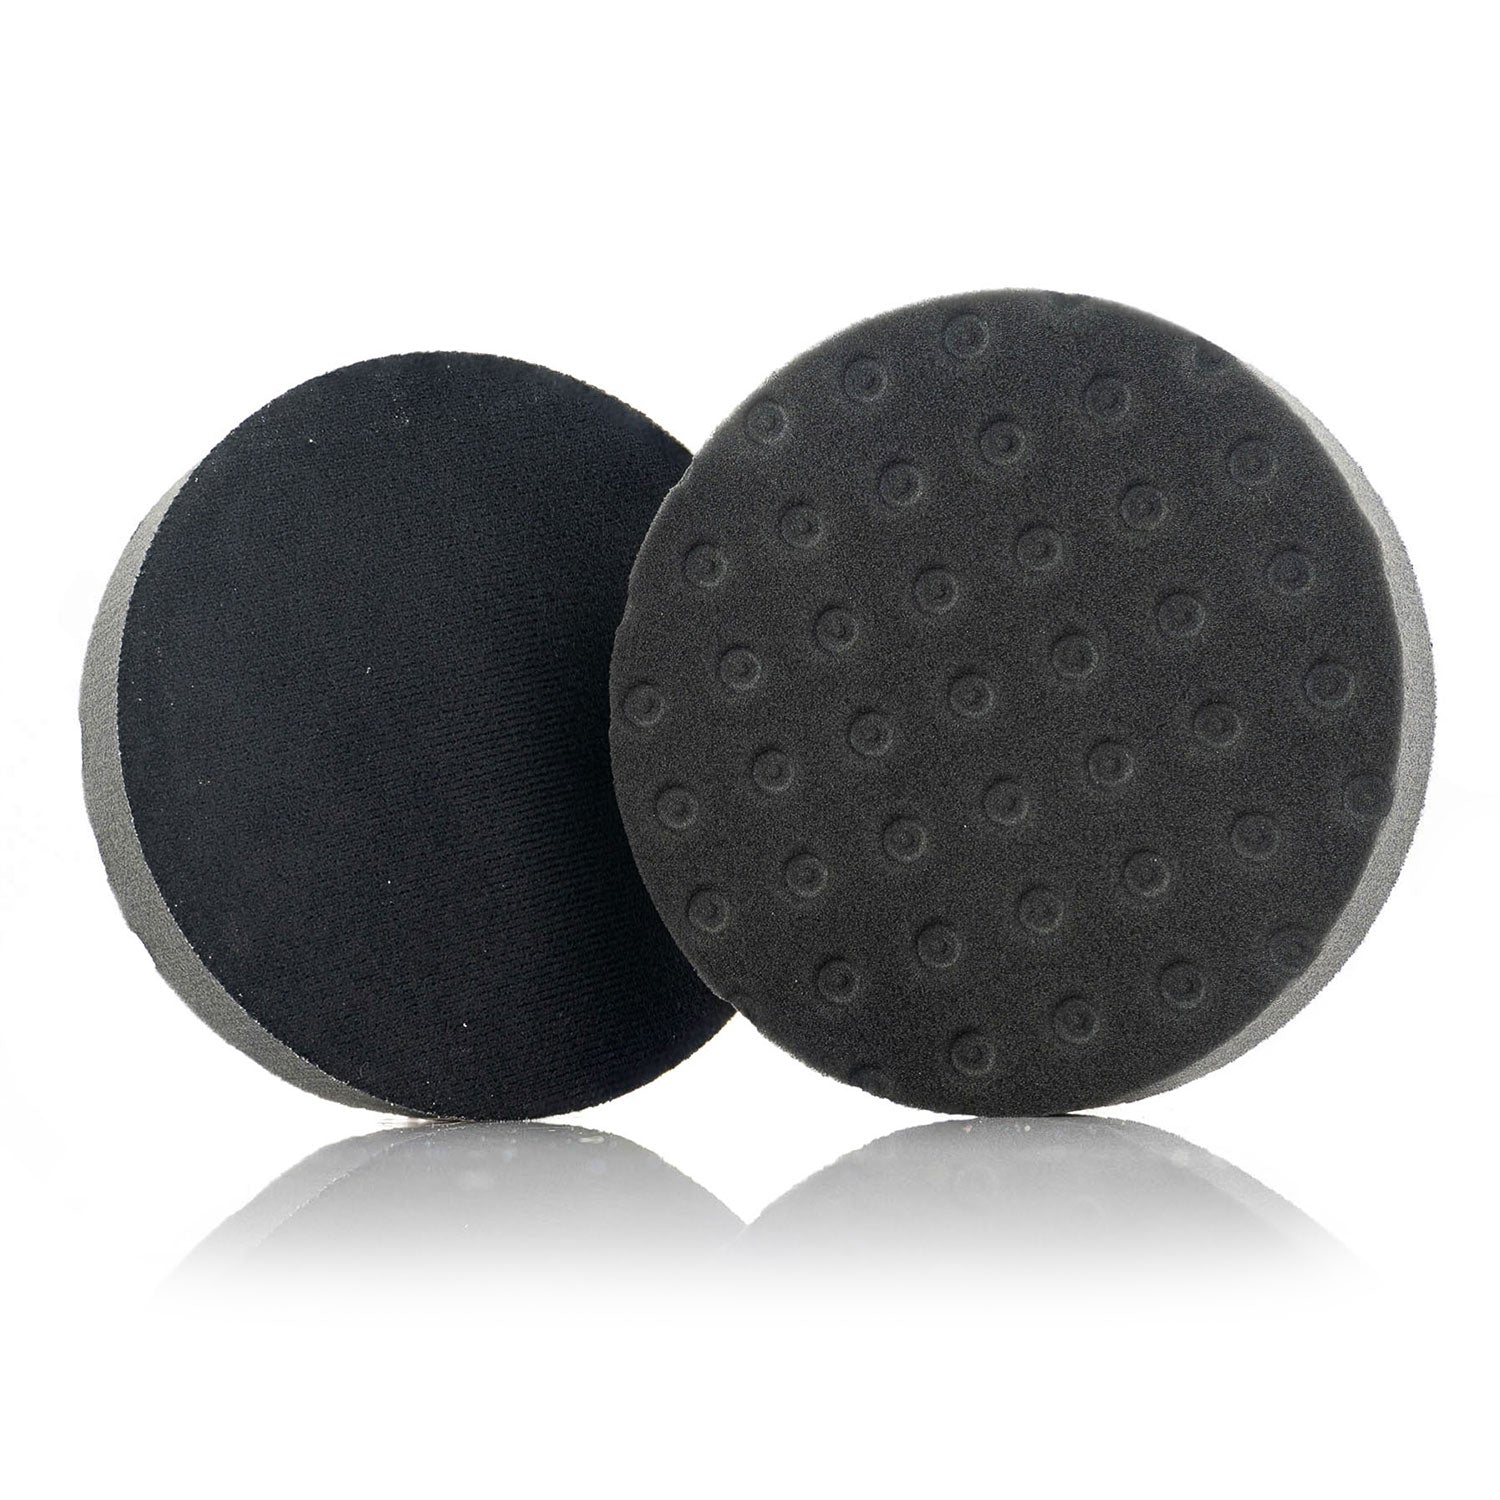 black-6-inch-dimple-pad-for-polishing